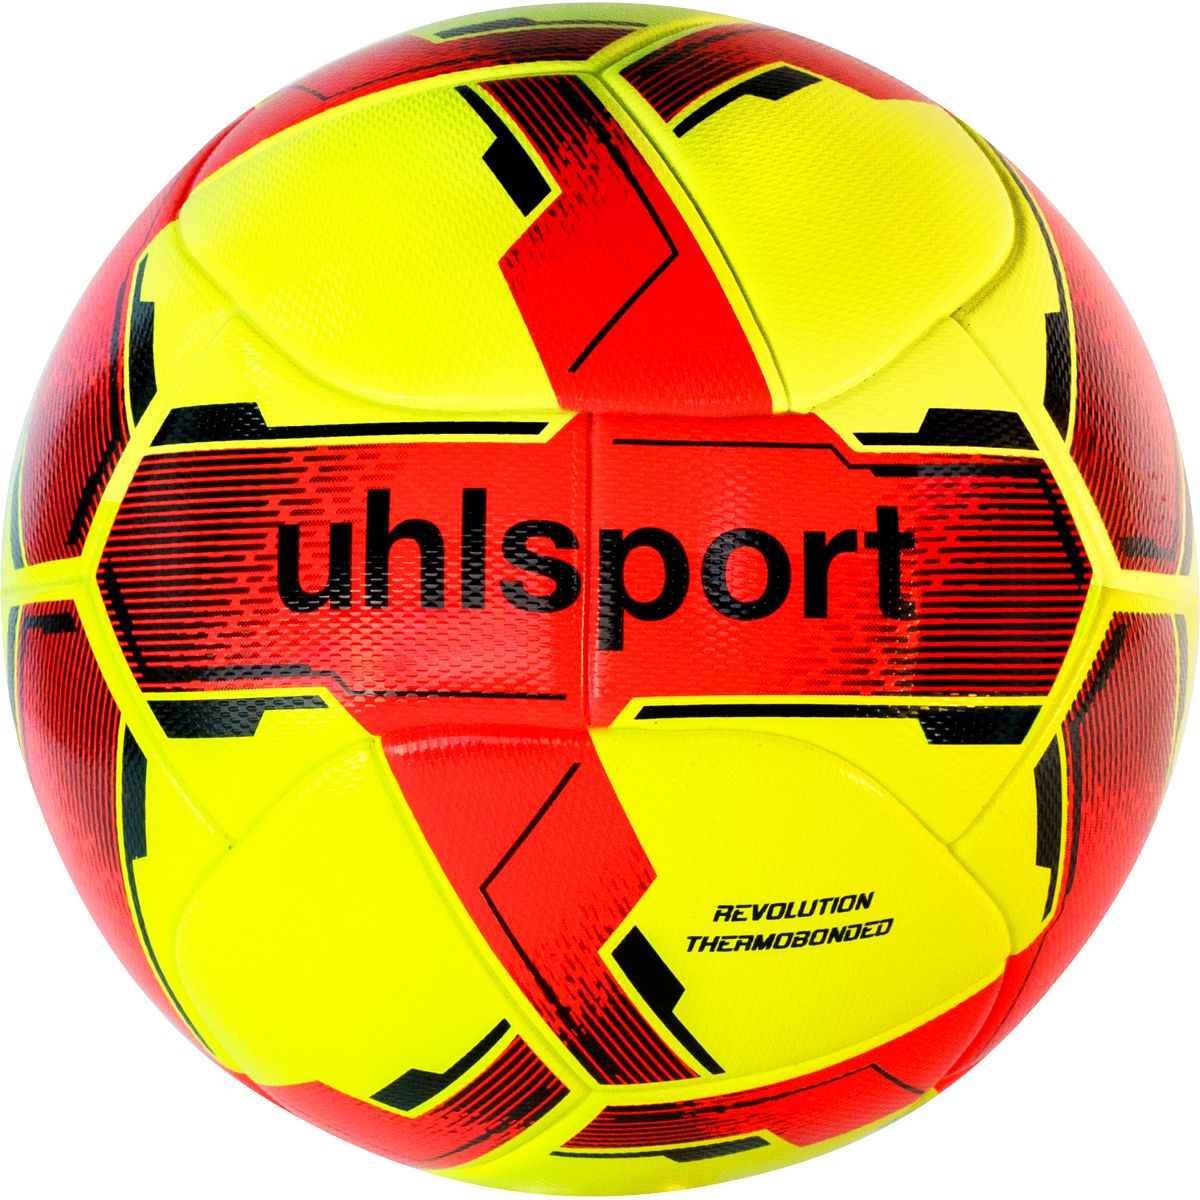 Uhlsport Revolution Thermobonded Outdoor-Fußball